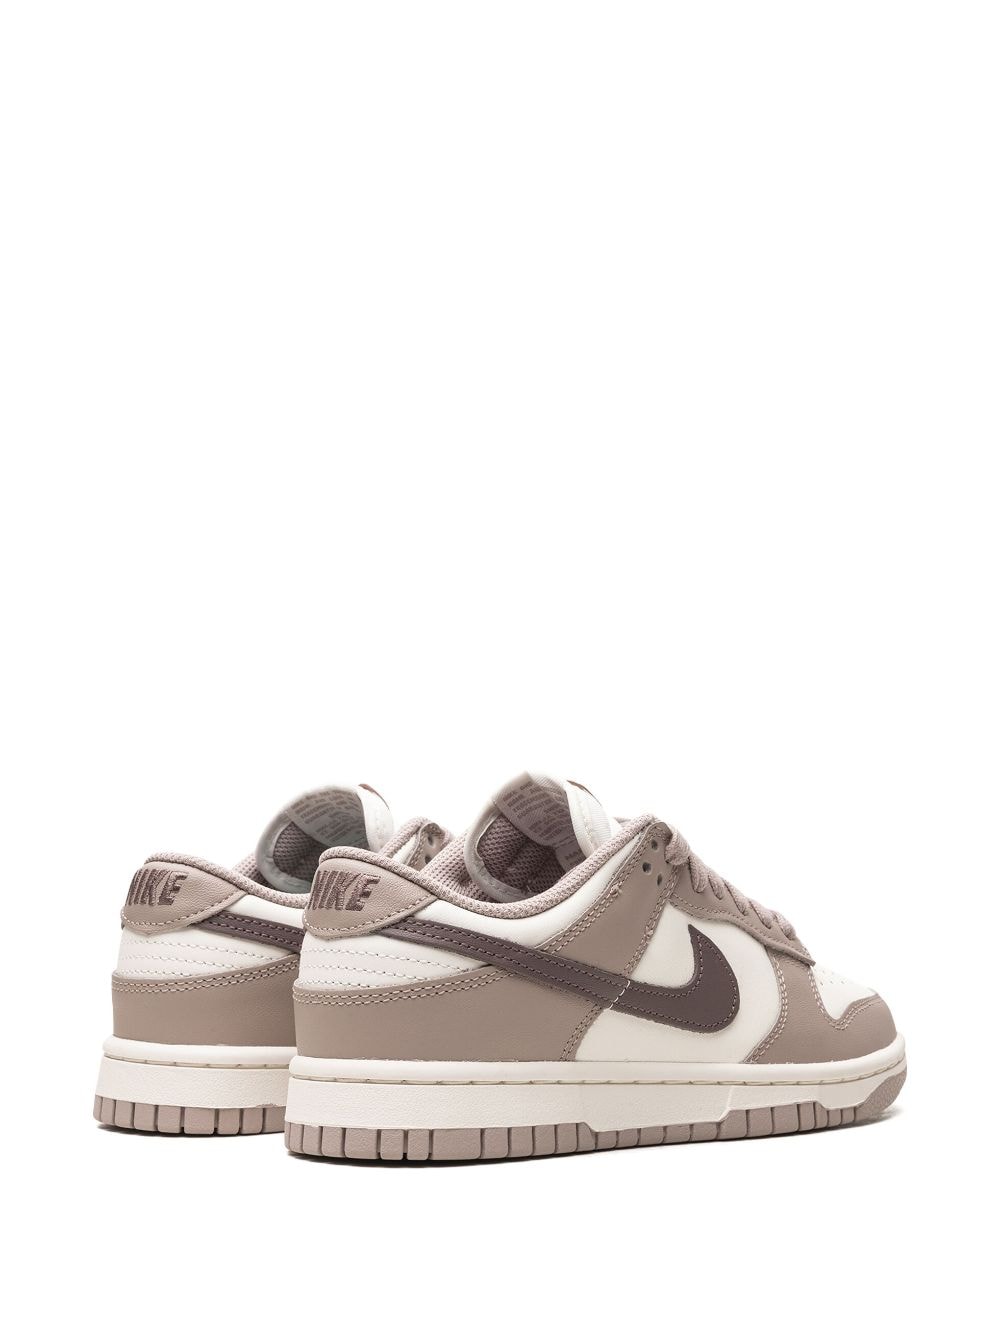 Nike Dunk Low "Diffused Taupe" sneakers White